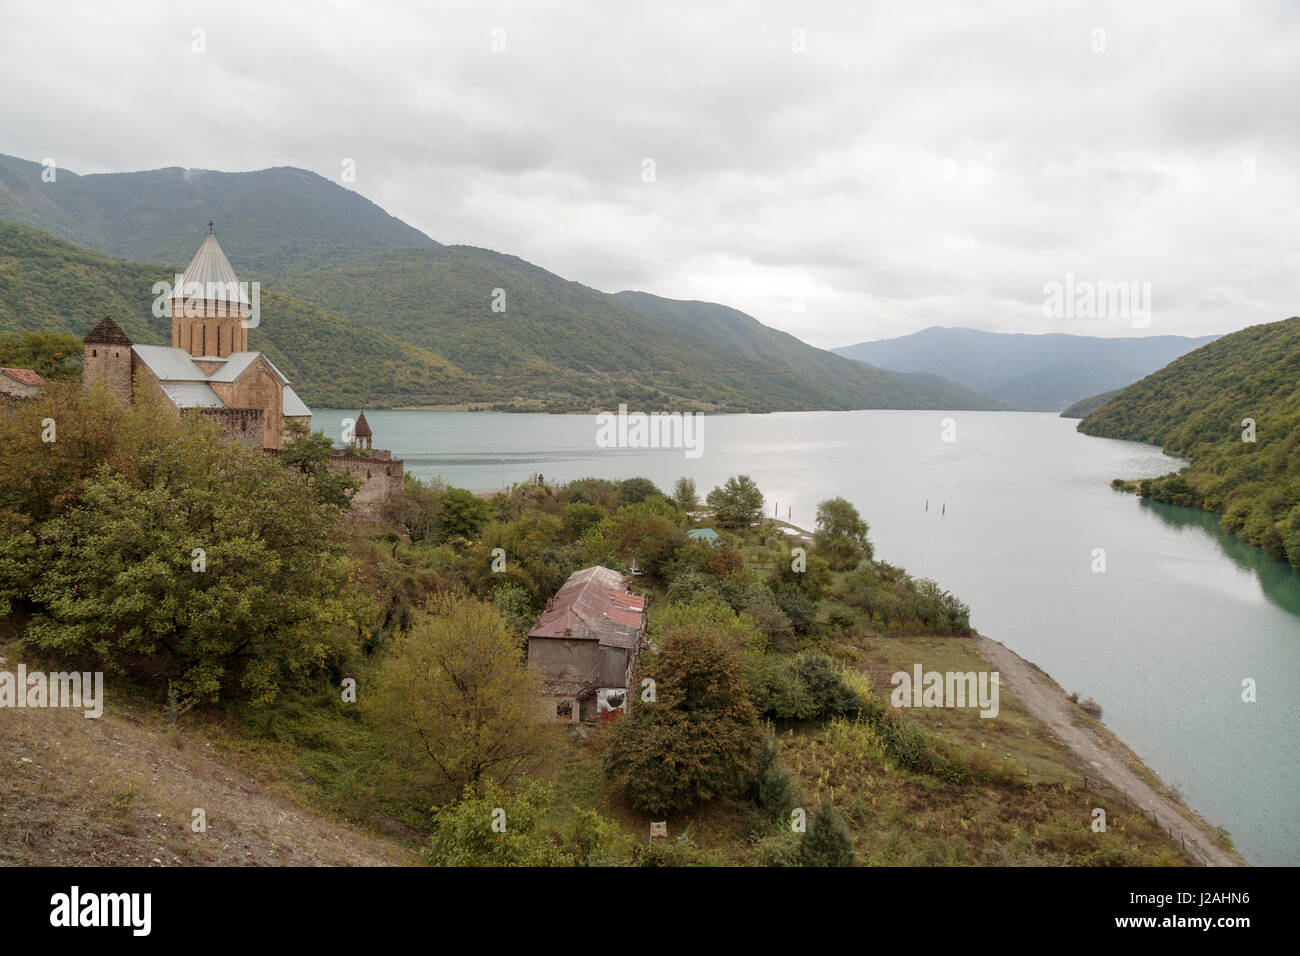 Georgia, Aragvi. Ananuri Castle complex with the Aragvi river behind it. Stock Photo